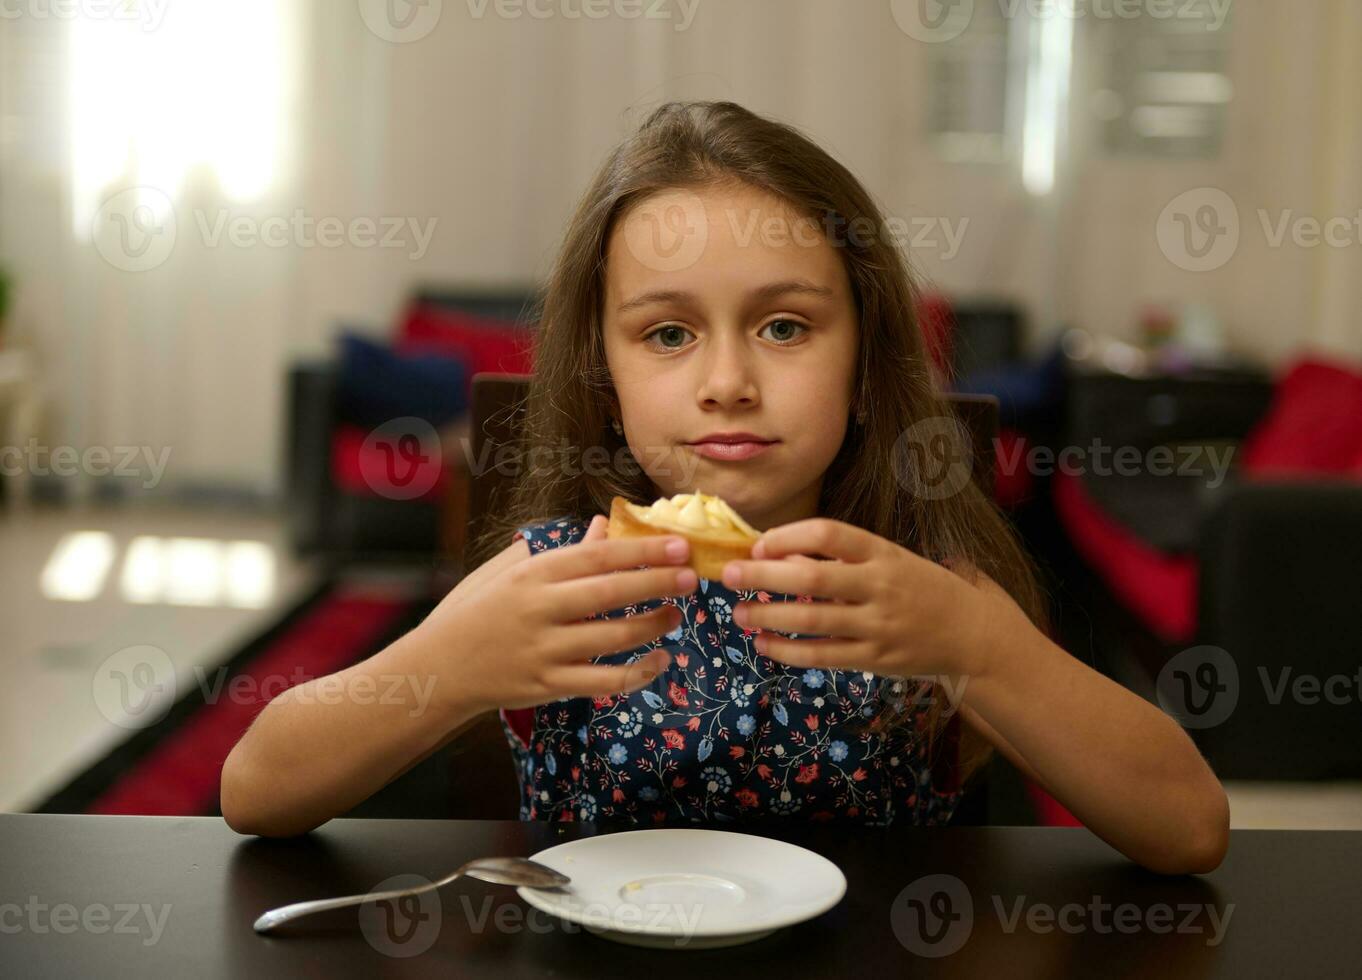 Adorable little child girl holding a sweet French dessert, smiling cutely and looking at camera photo